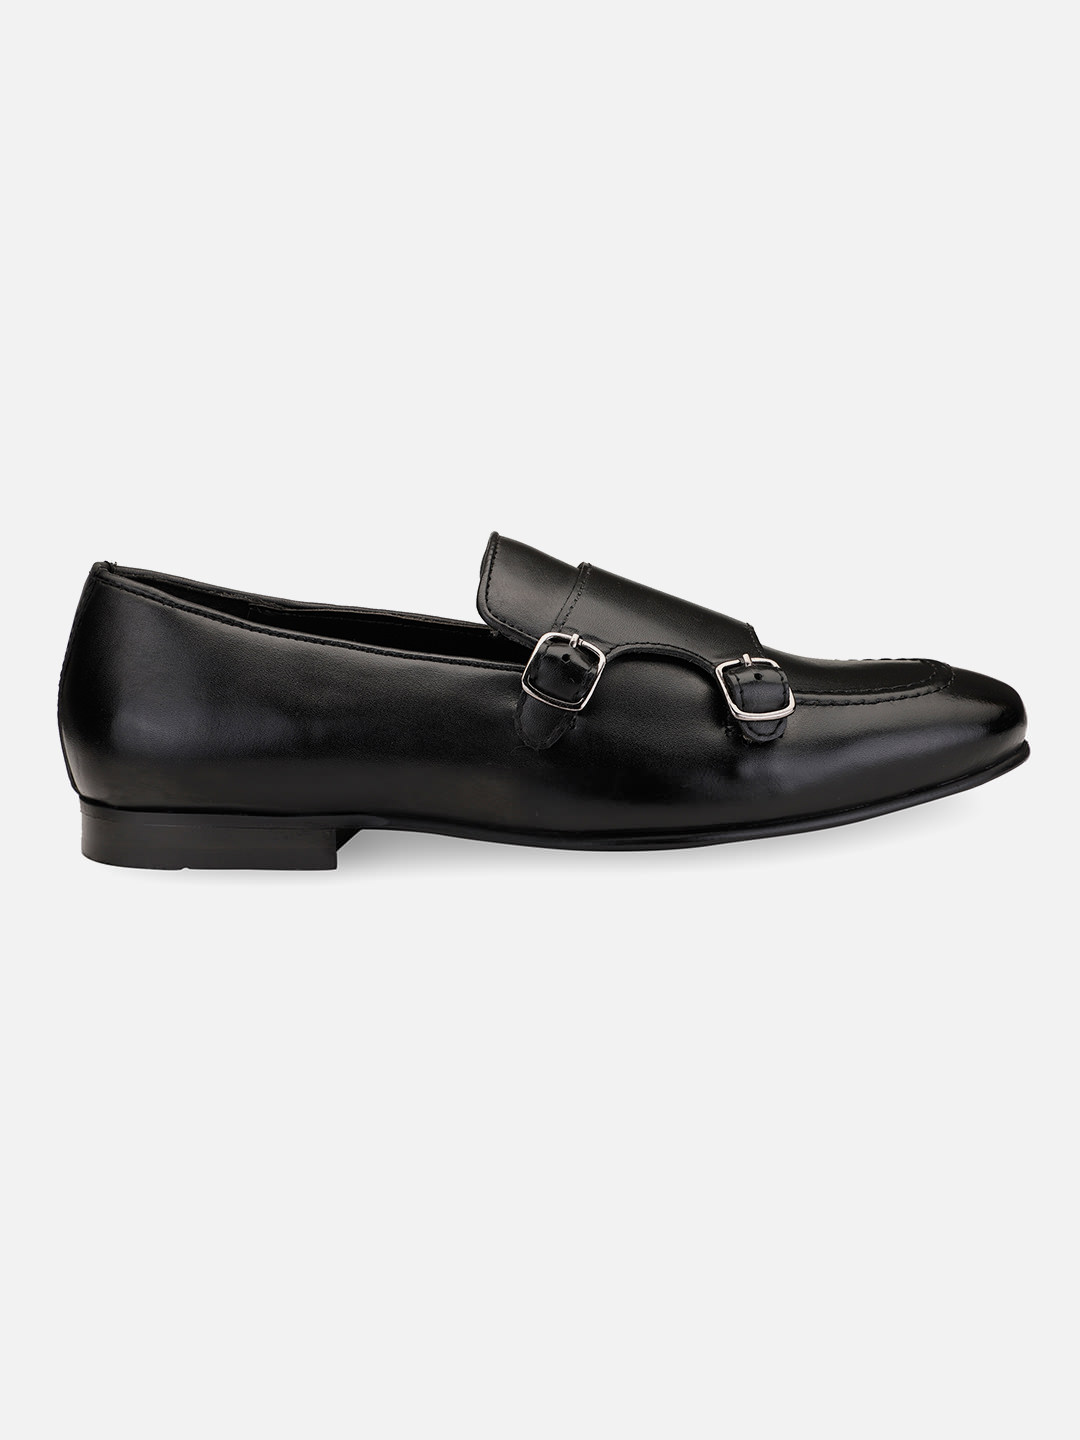 Buy Online Genuine Leather Black Double Monk Strap Loafers